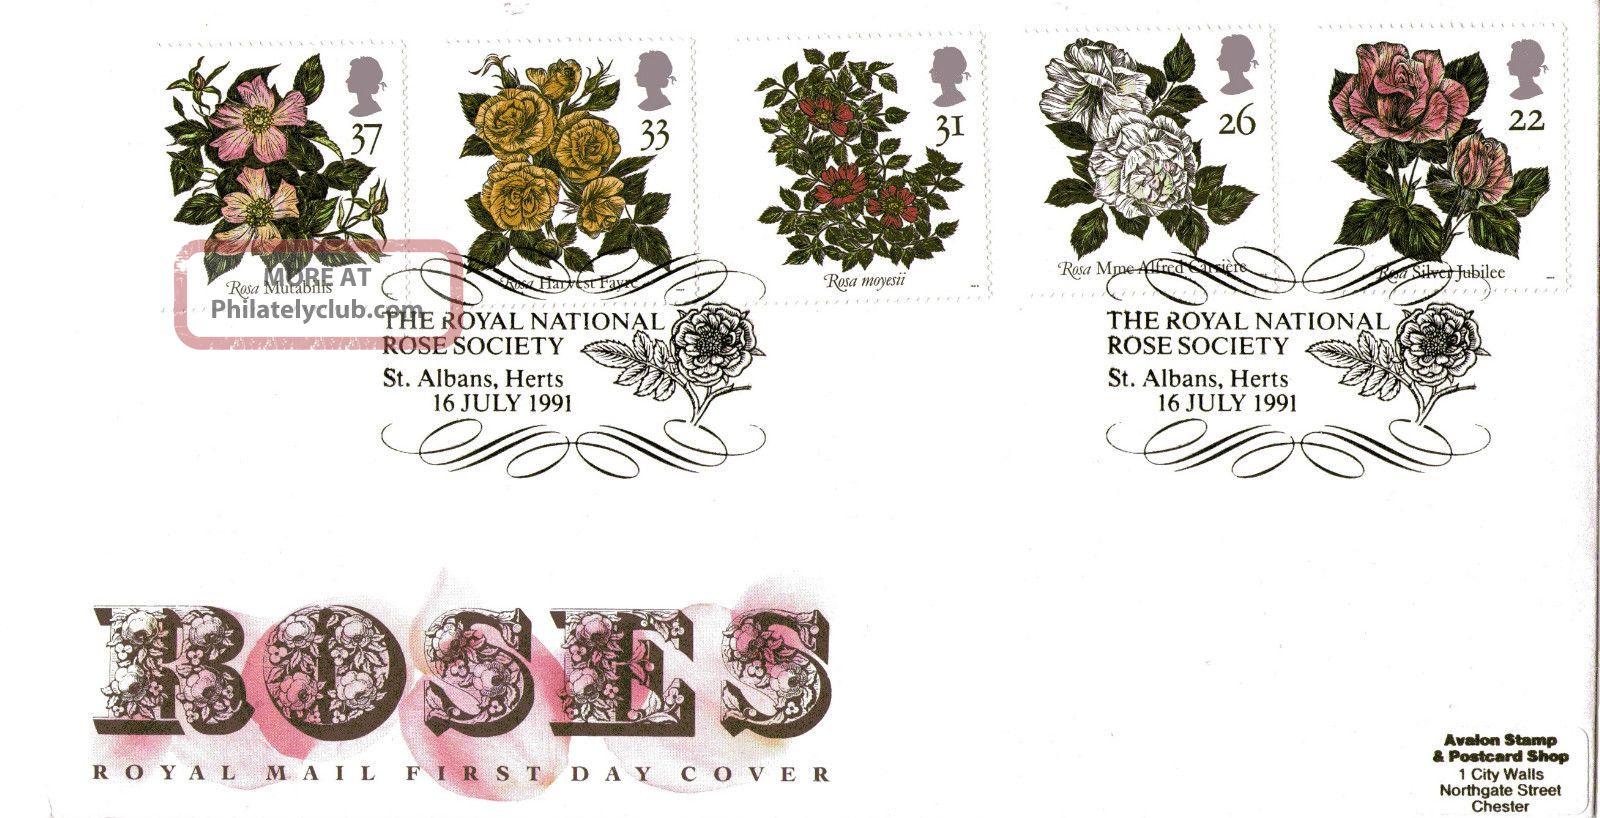 16 July 1991 Roses Royal Mail First Day Cover The Royal National Rose Society Topical Stamps photo